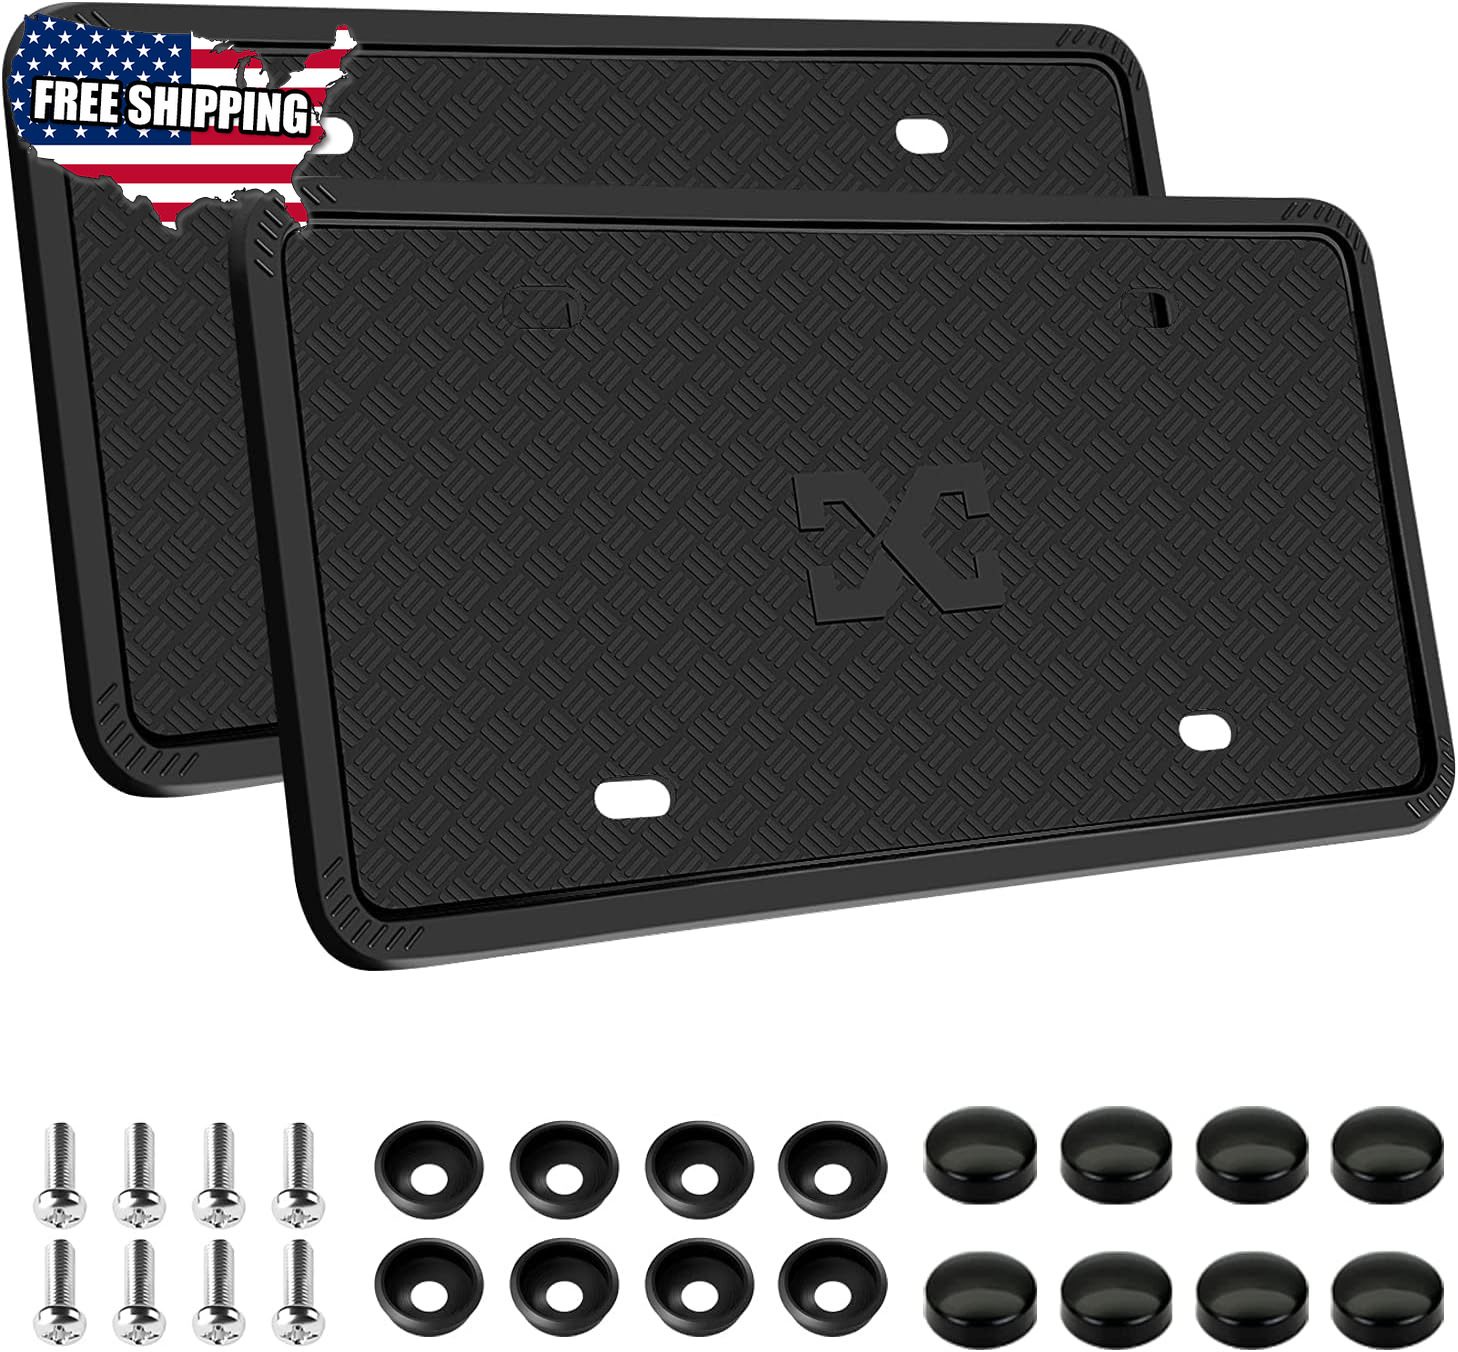  Silicone License Plate Frame Rubber License Plate Holder with Screws 2pcs USA